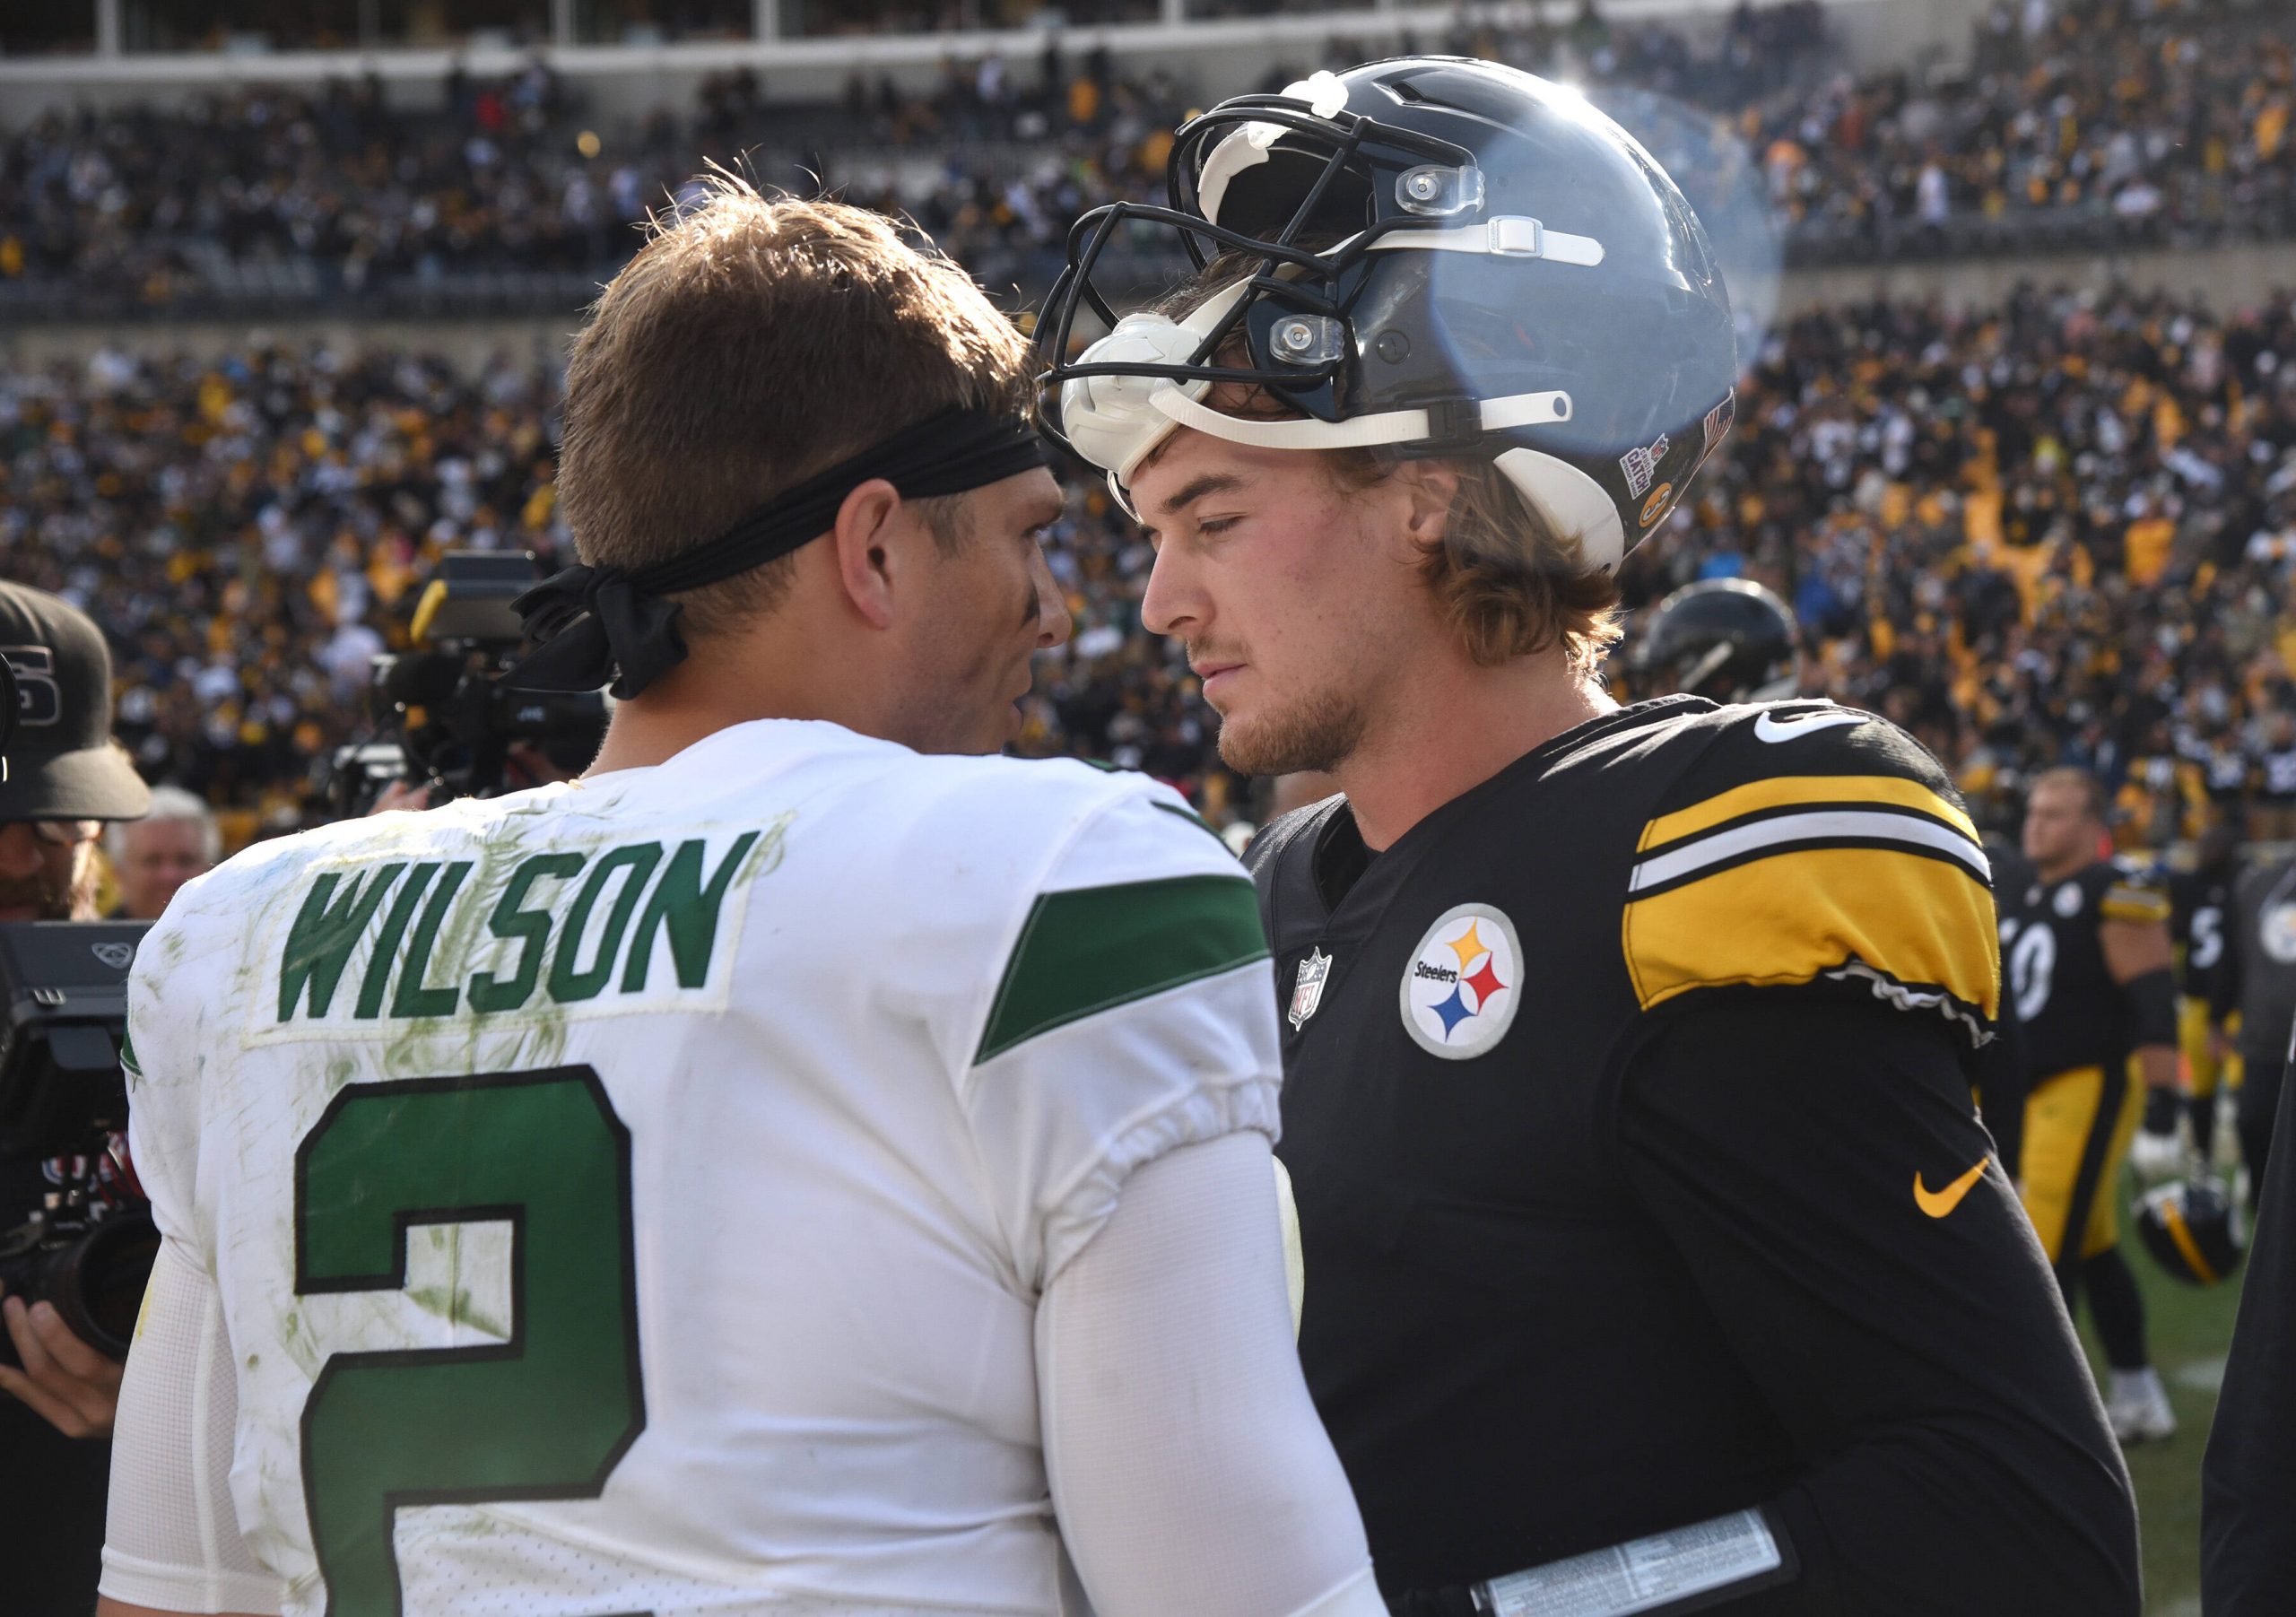 NFL, American Football Herren, USA New York Jets at Pittsburgh Steelers Oct 2, 2022 Pittsburgh, Pennsylvania, USA New York Jets quarterback Zach Wilson 2 meets with Pittsburgh Steelers quarterback Kenny Pickett 8 following their game at Acrisure Stadium. The Jets won 24-20 as Pickett made his debut. Pittsburgh Acrisure Stadium Pennsylvania USA, EDITORIAL USE ONLY PUBLICATIONxINxGERxSUIxAUTxONLY Copyright: xPhilipxG.xPavelyx 20221002_cec_pa4_156